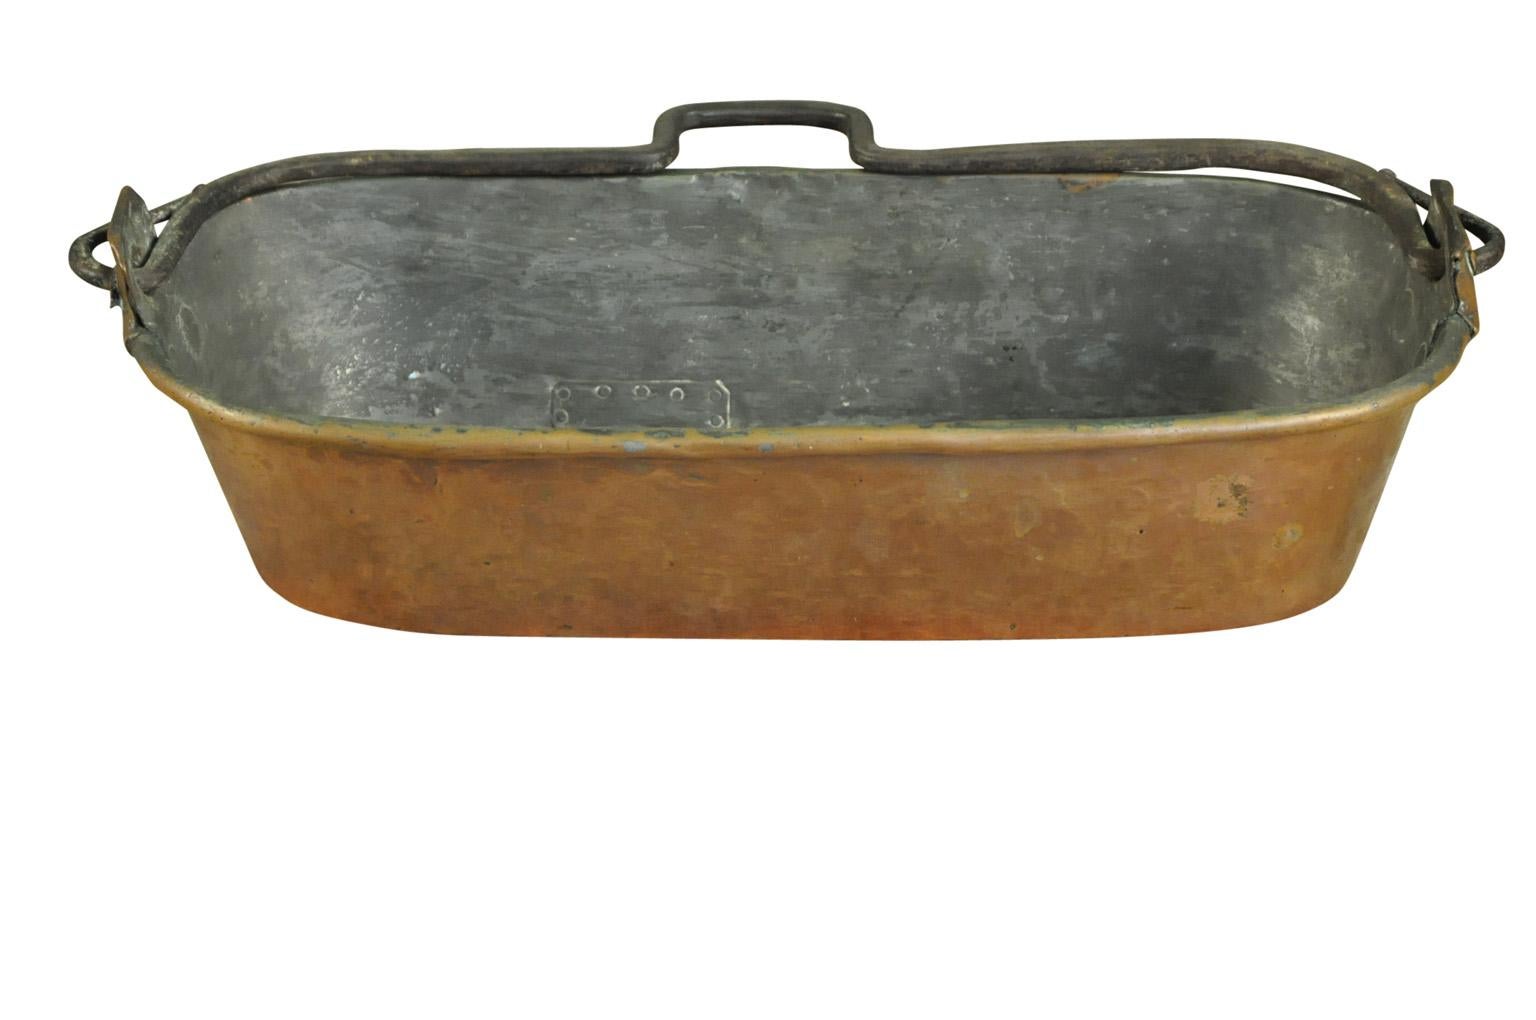 A very charming French 18th century fish pan from the southwest of France. Terrific patina.